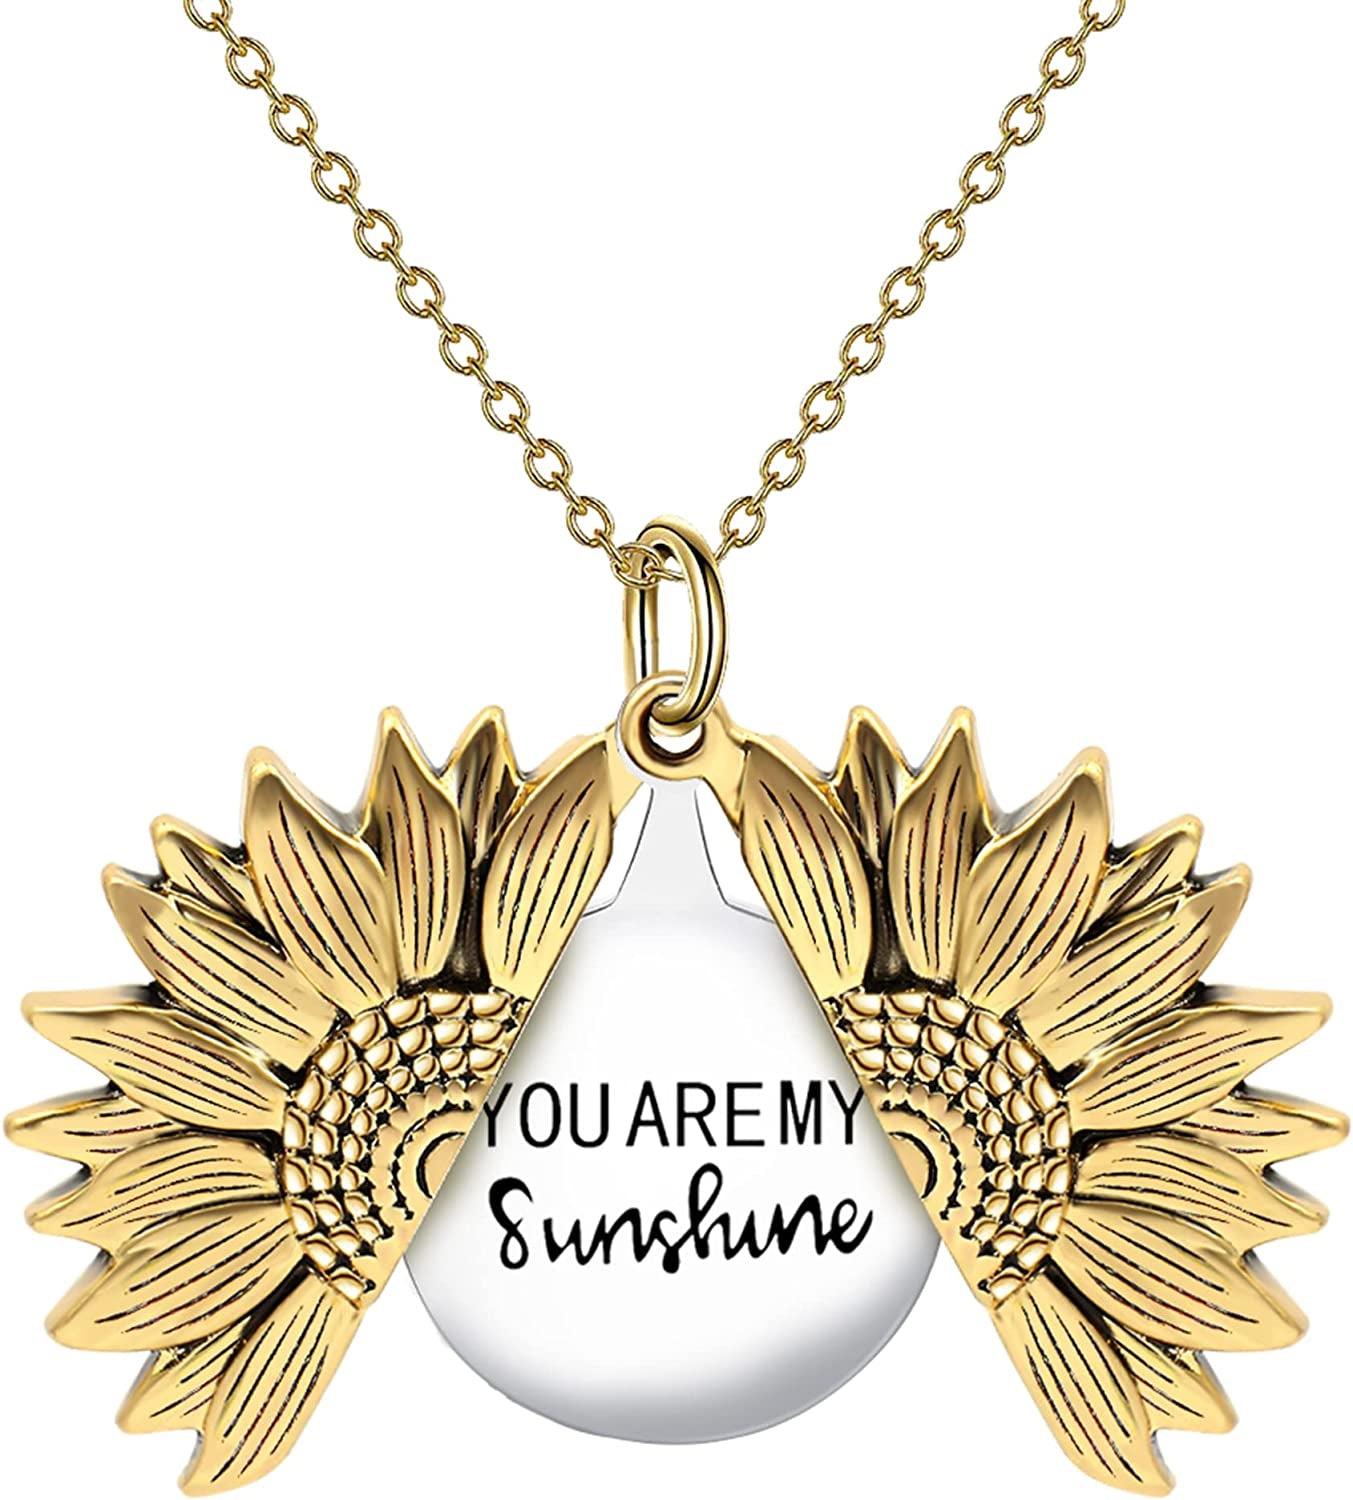 You Are My Sunshine Engraved Necklace - Everyday-Sales.com